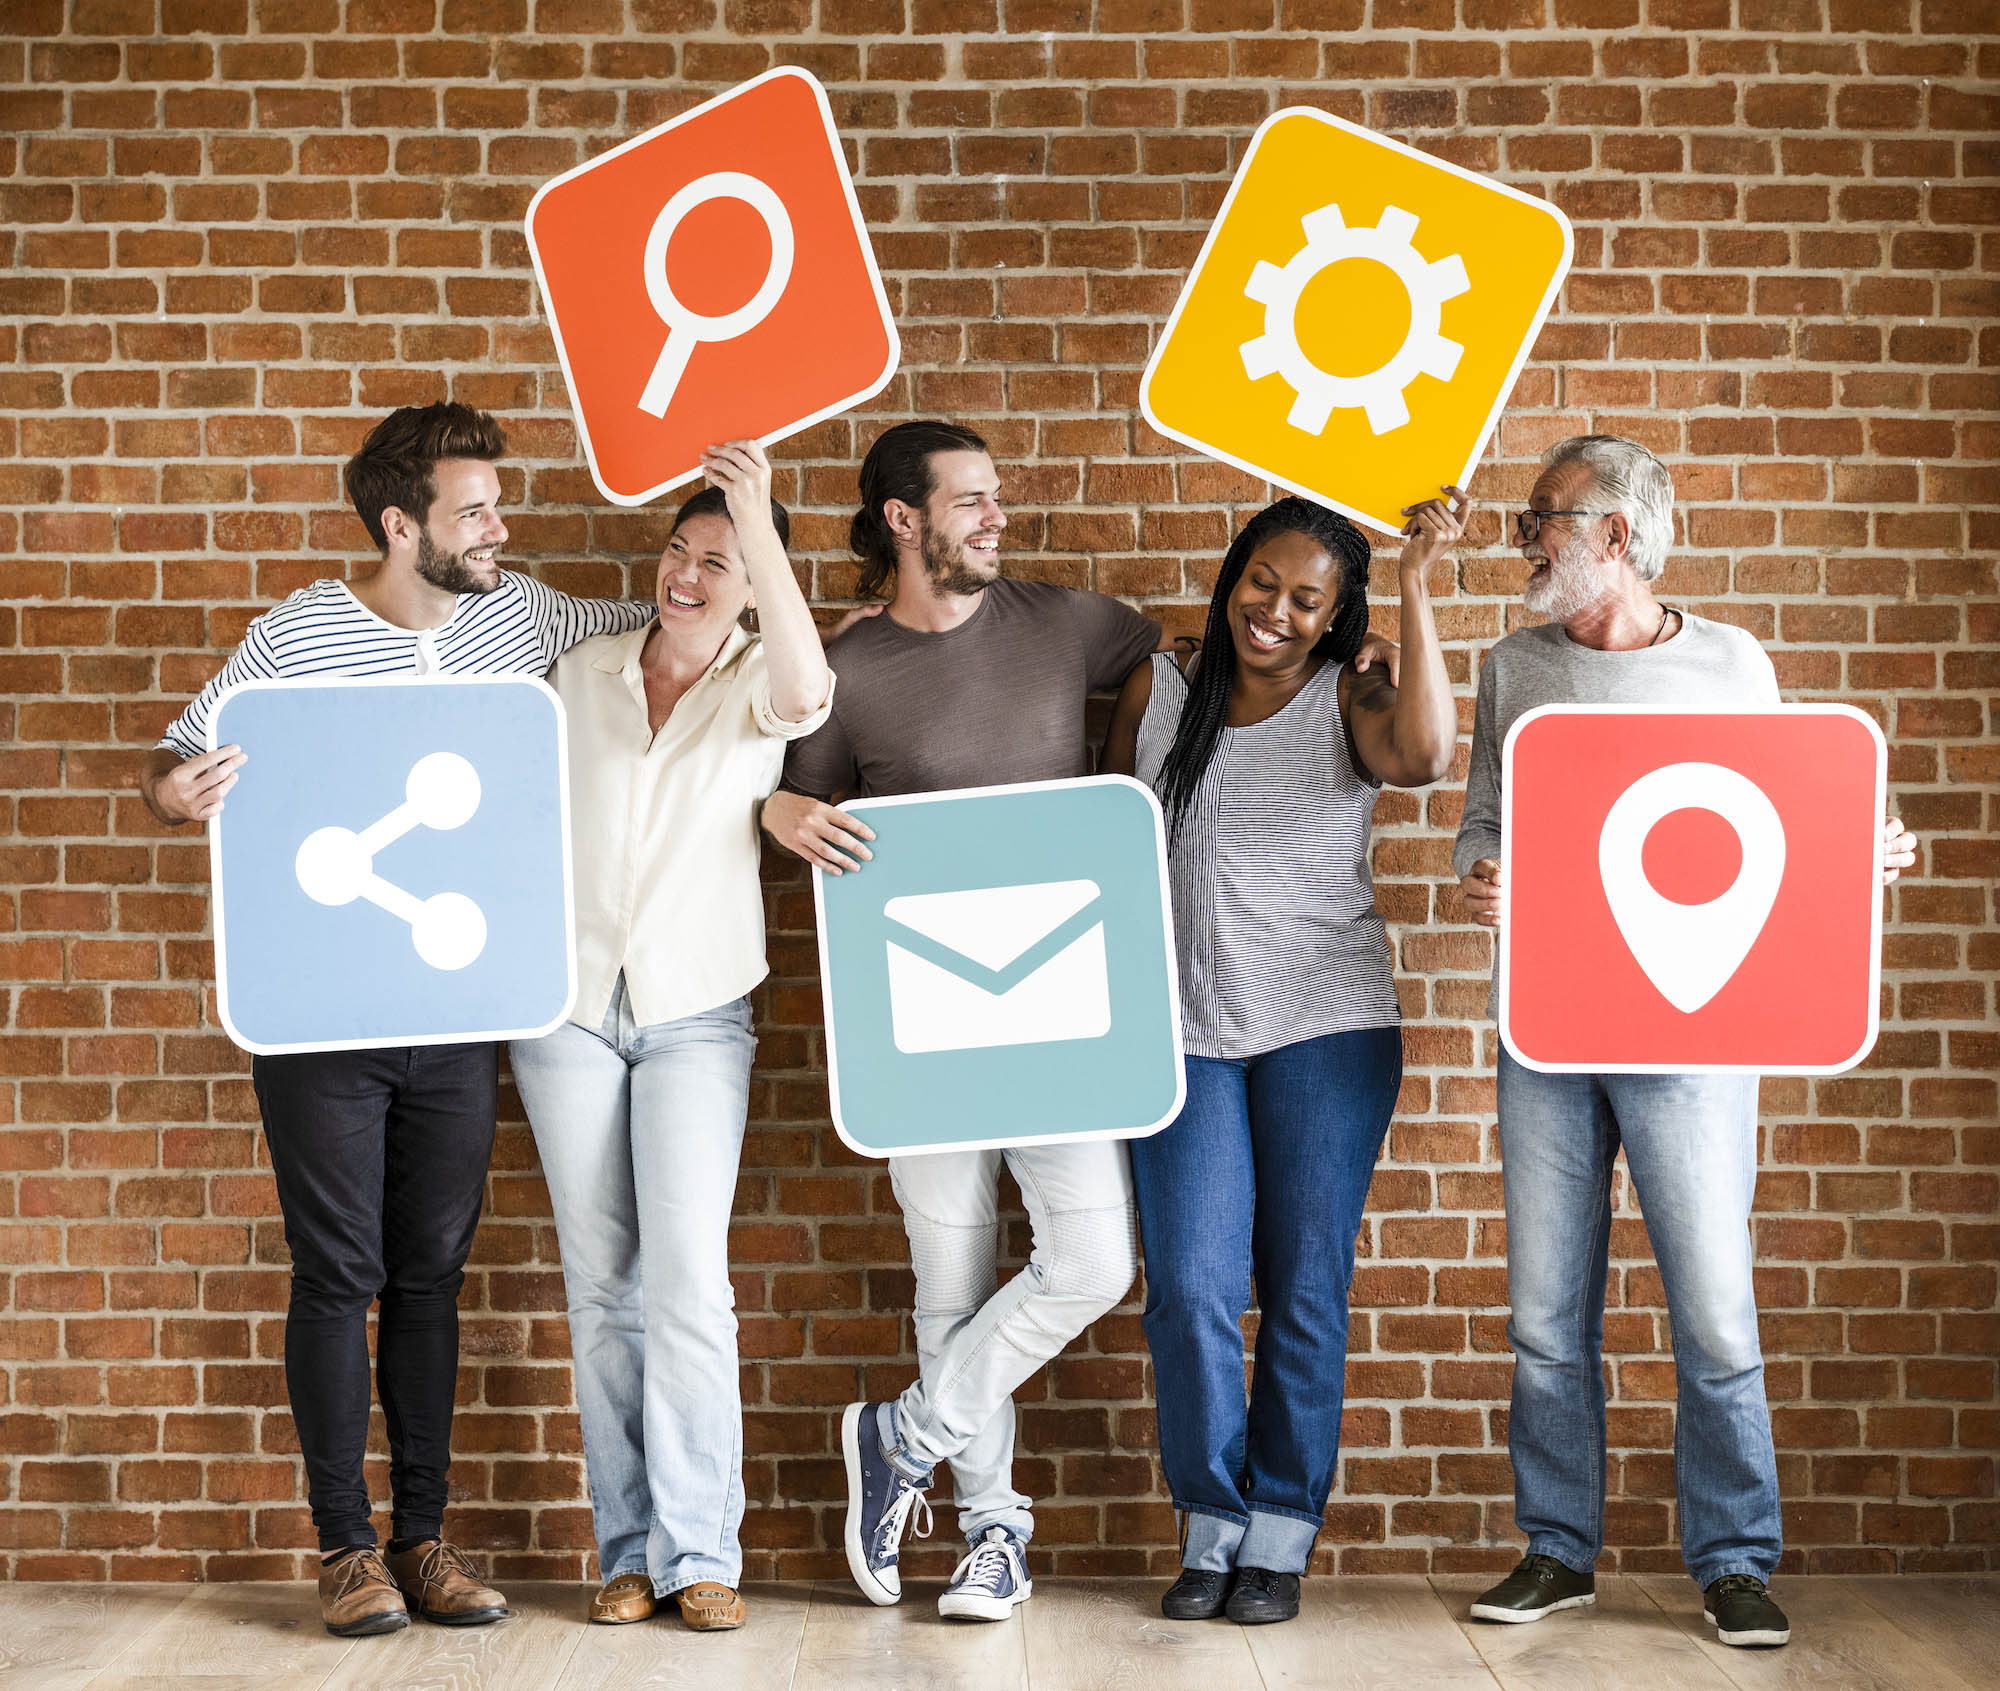 Diverse group of people holding icons for search, share, settings, mail, and location.